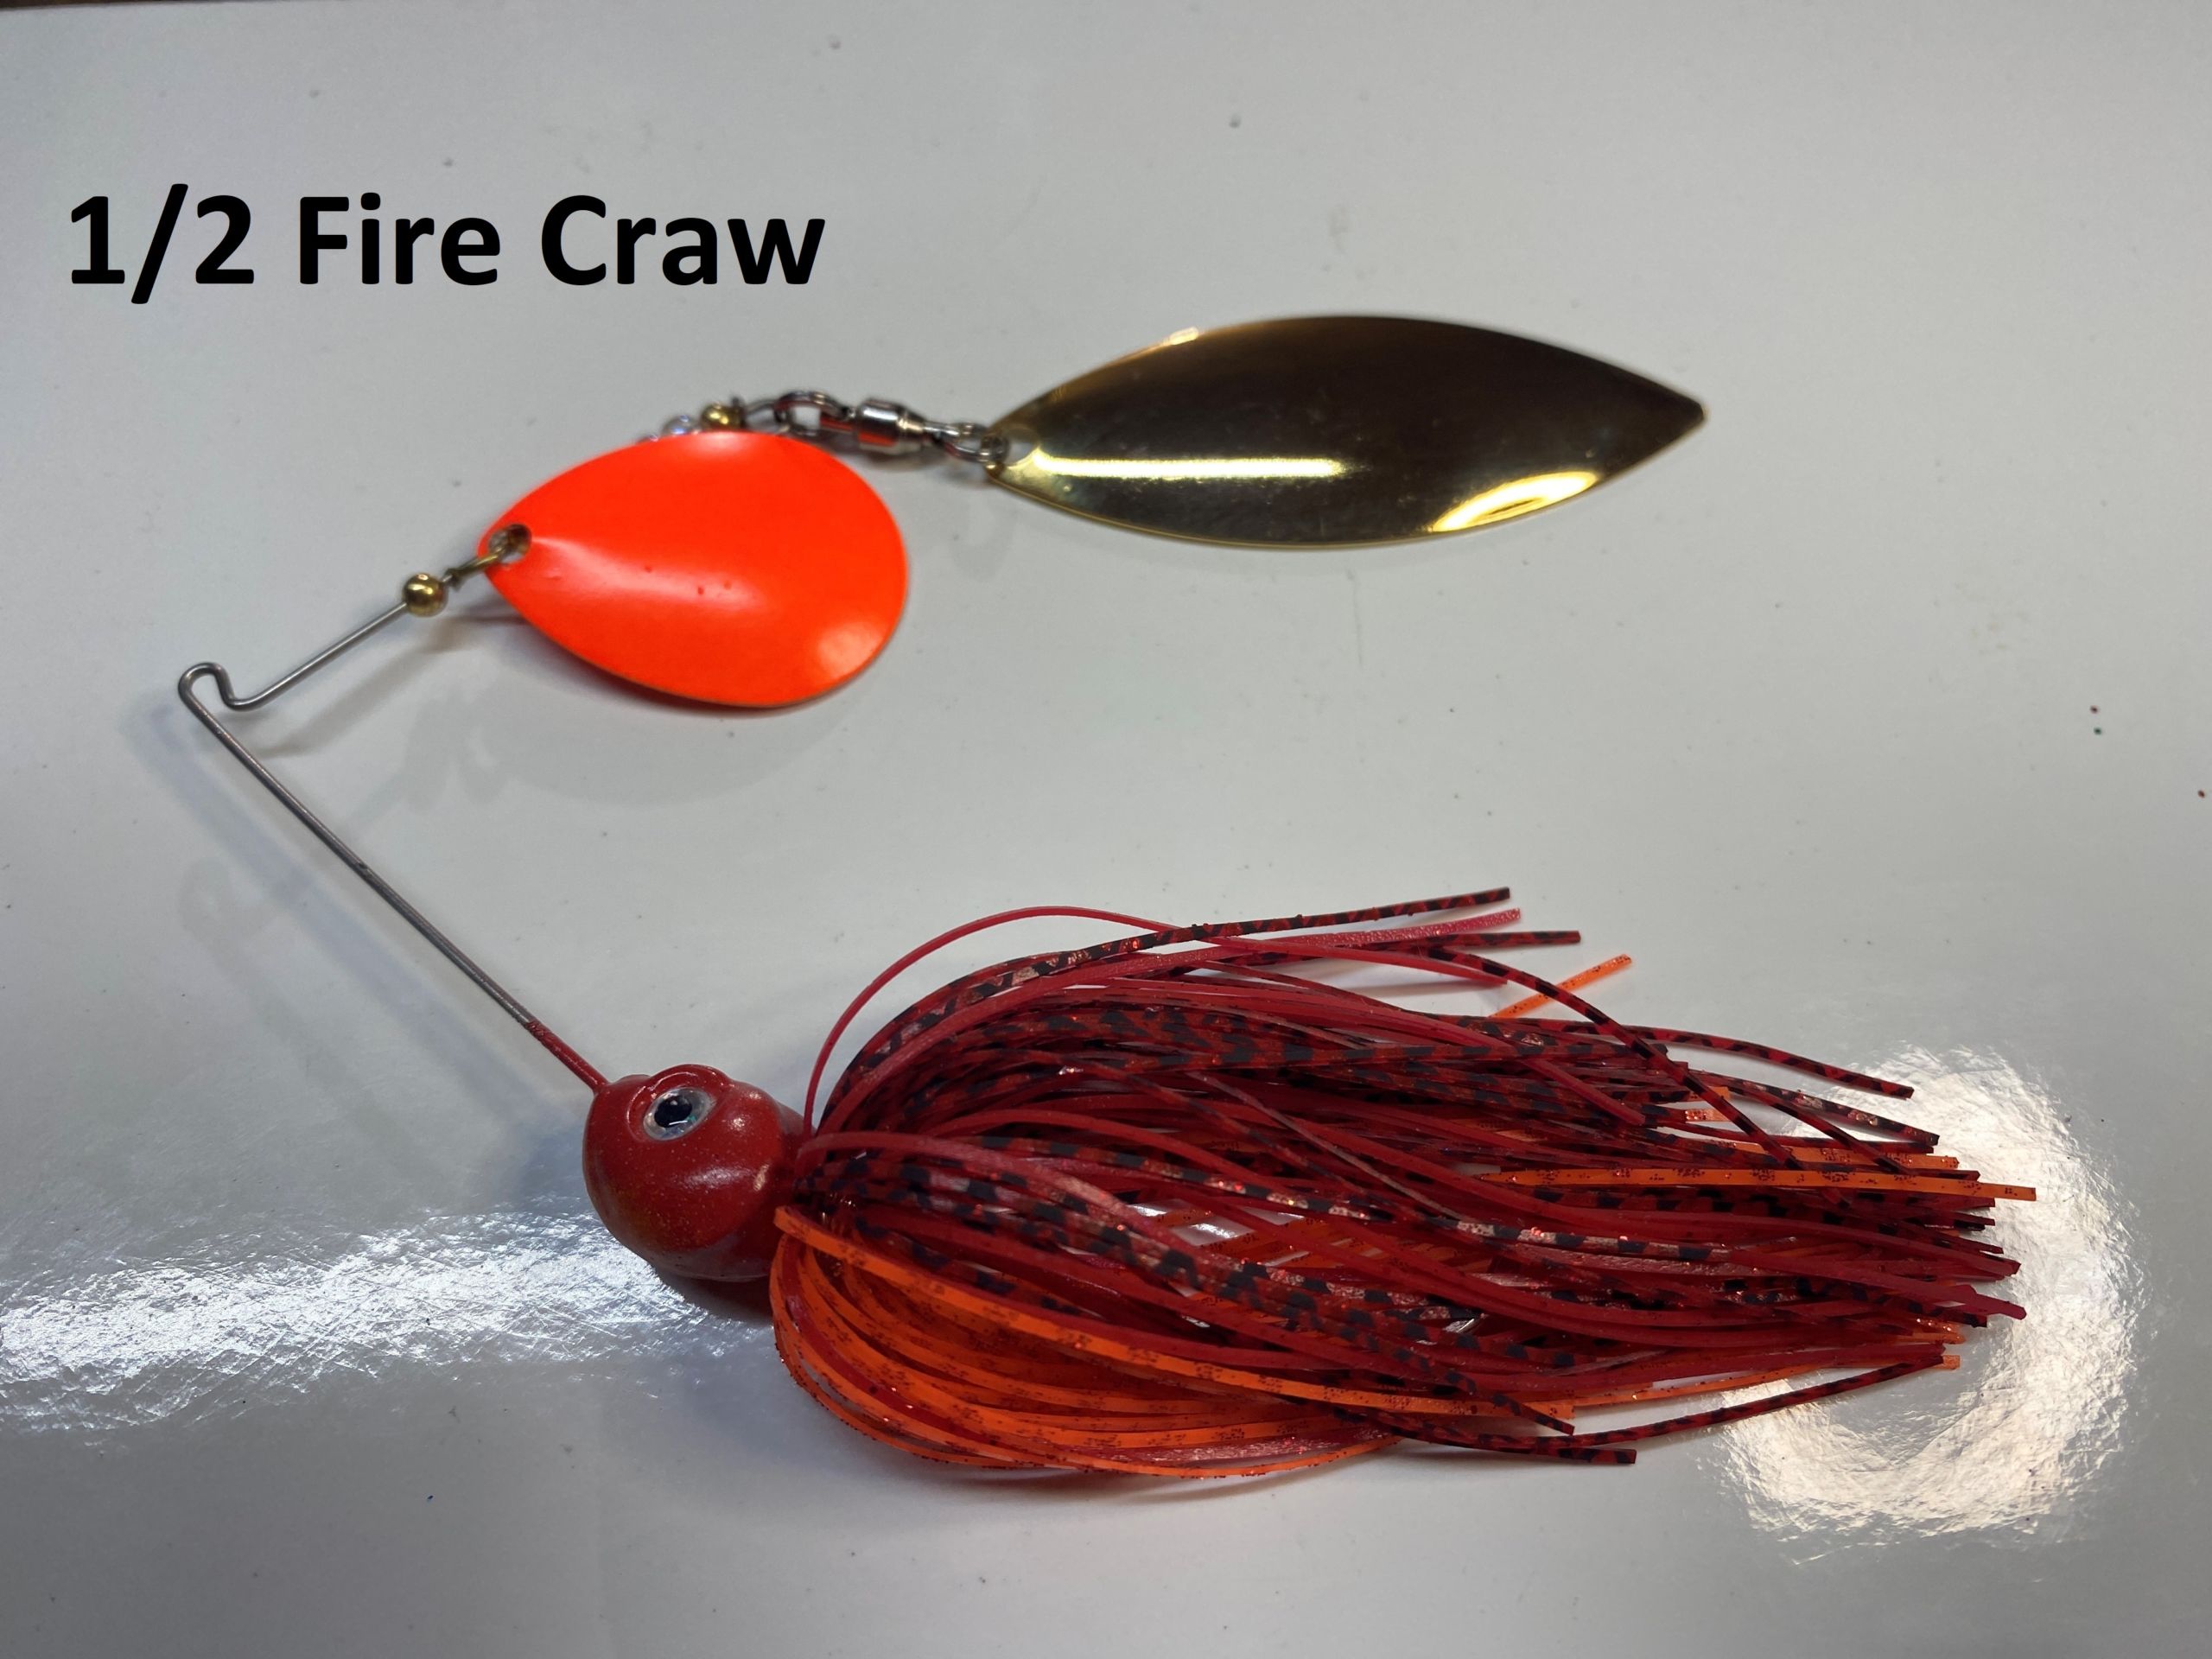 1/2 Fire Craw – Adrenaline Tackle Company 217-502-6880